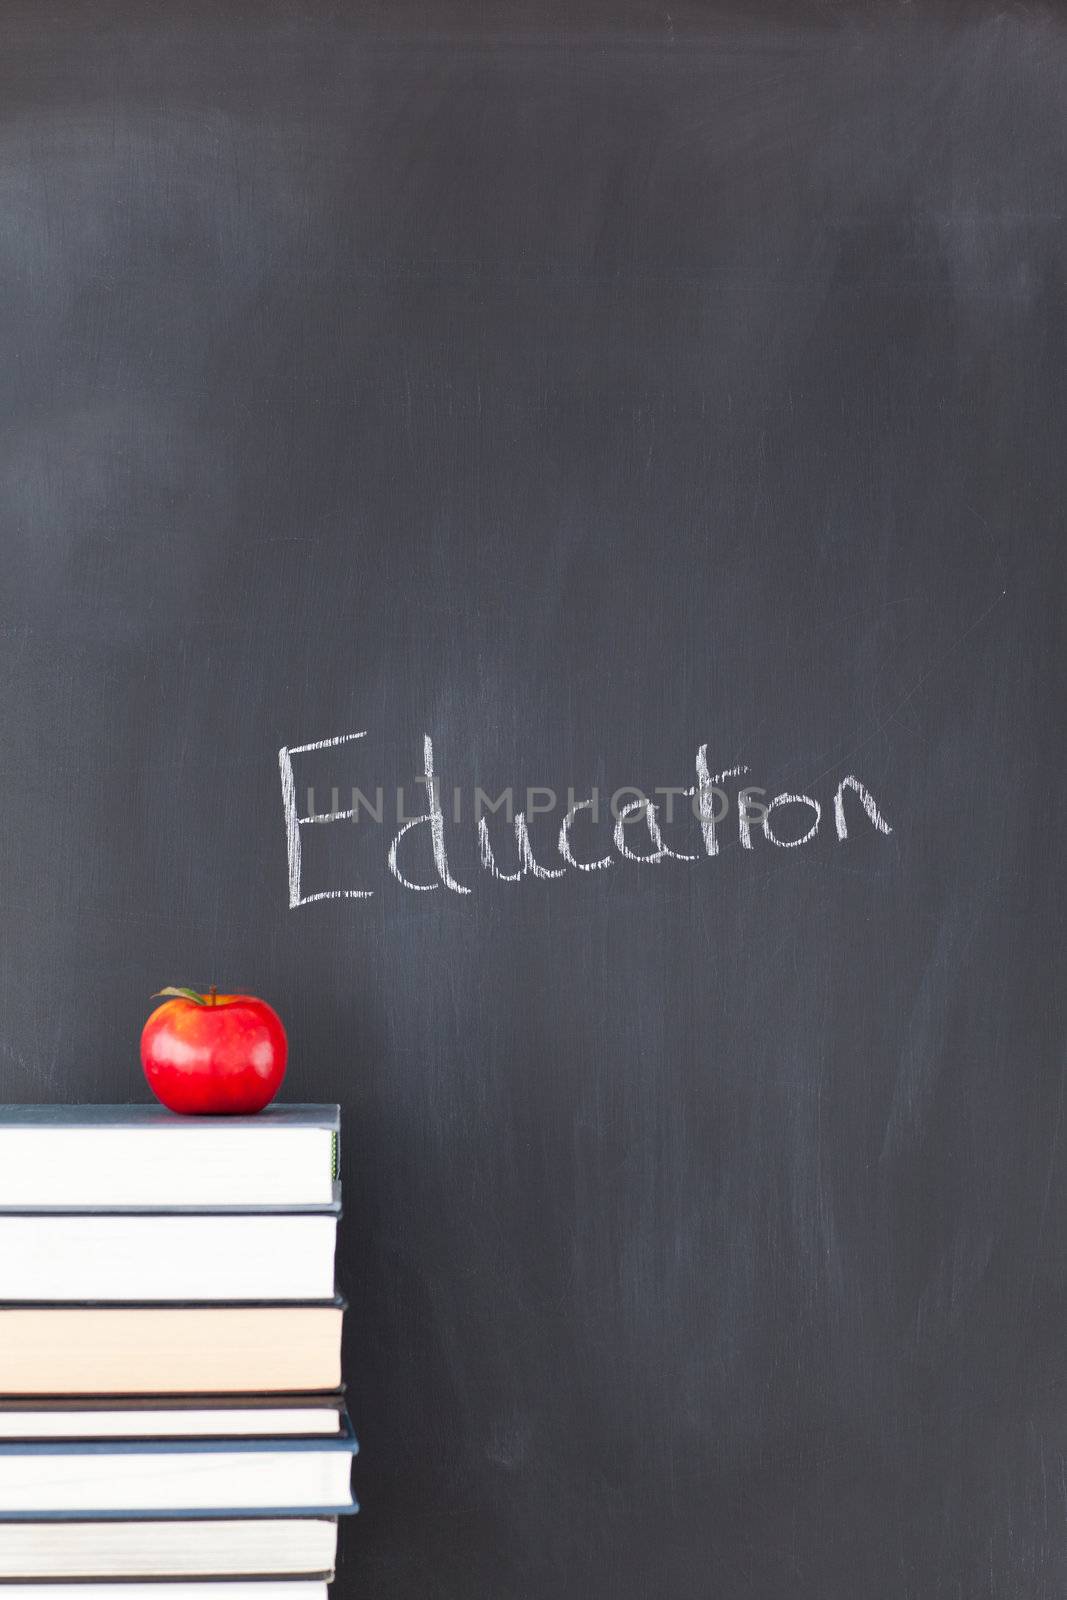 Stack of books with a red apple and a blackboard with "education by Wavebreakmedia